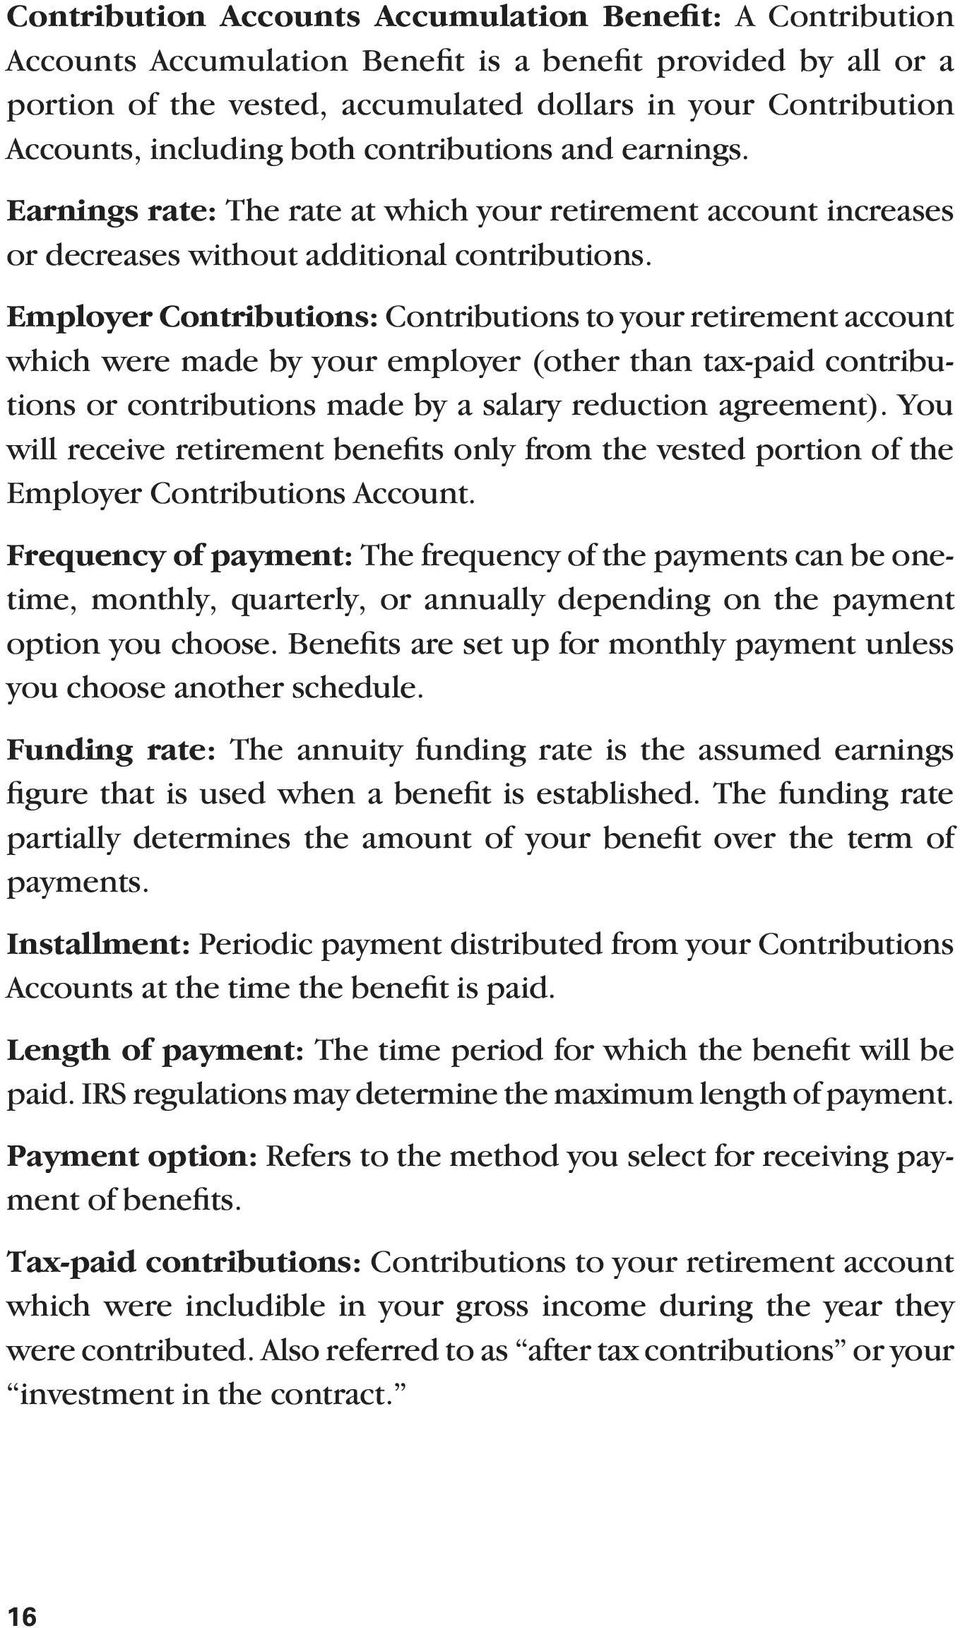 Employer Contributions: Contributions to your retirement account which were made by your employer (other than tax-paid contributions or contributions made by a salary reduction agreement).